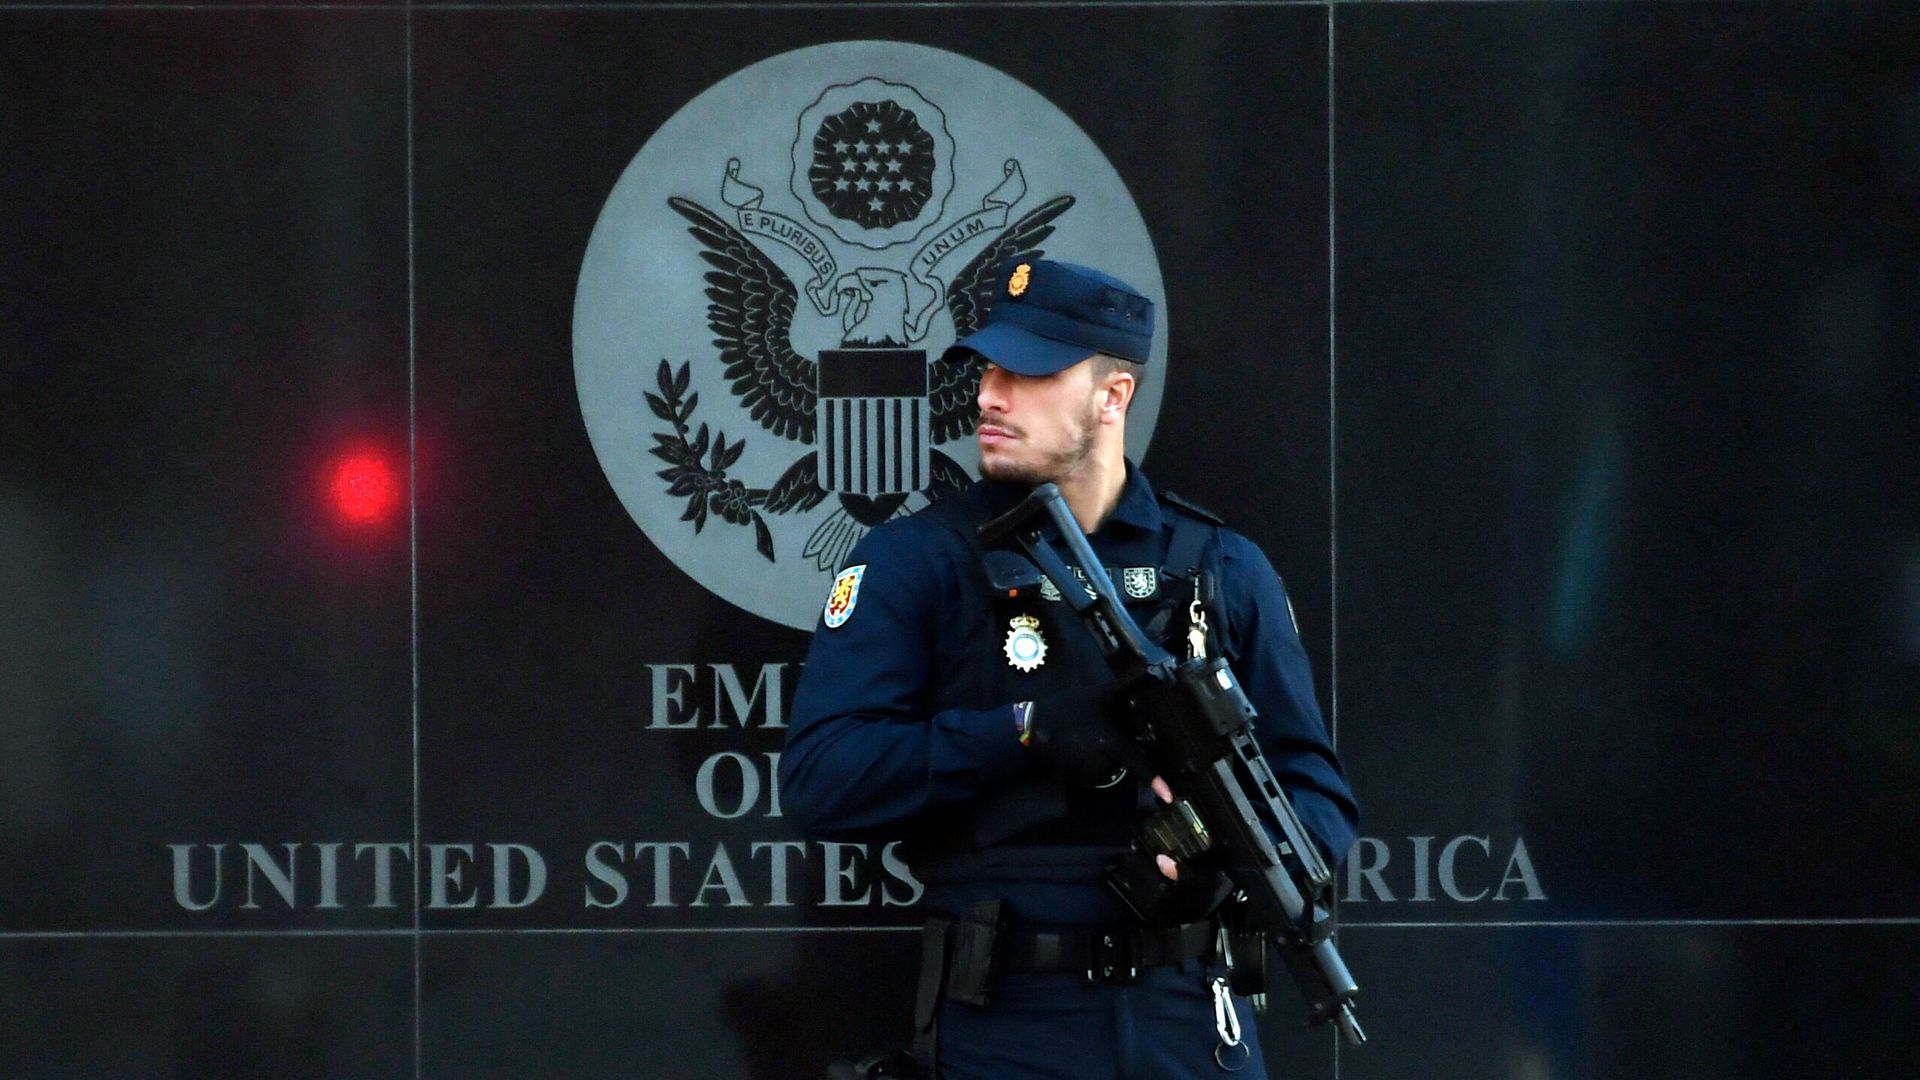 A Spanish policeman stands guard near the US embassy in Madrid.